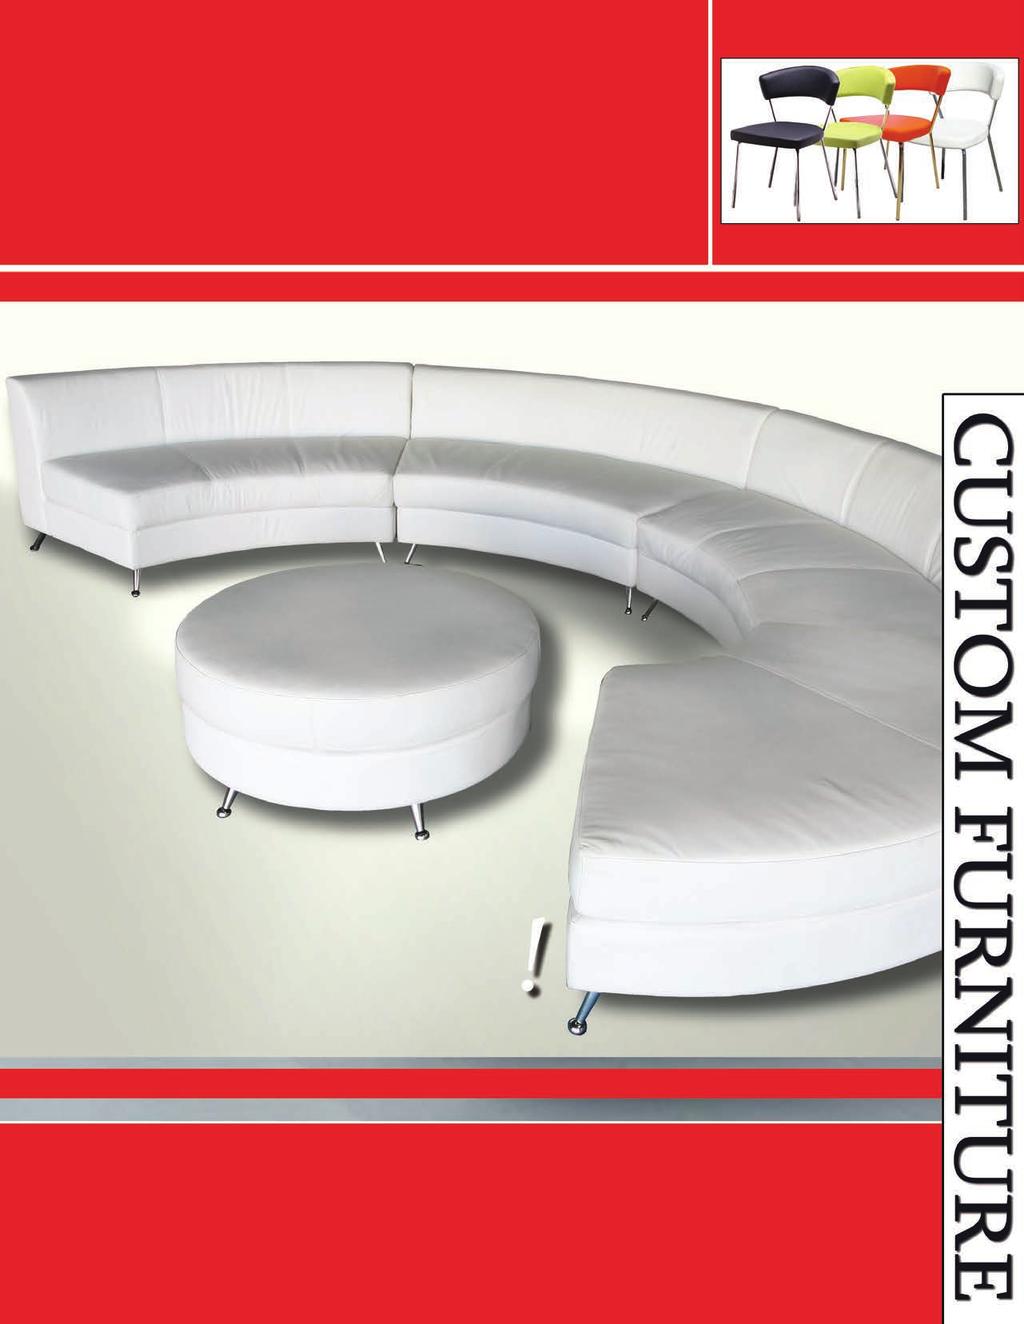 A CCENT Tradeshow & Event Furnishings v015.1 www.